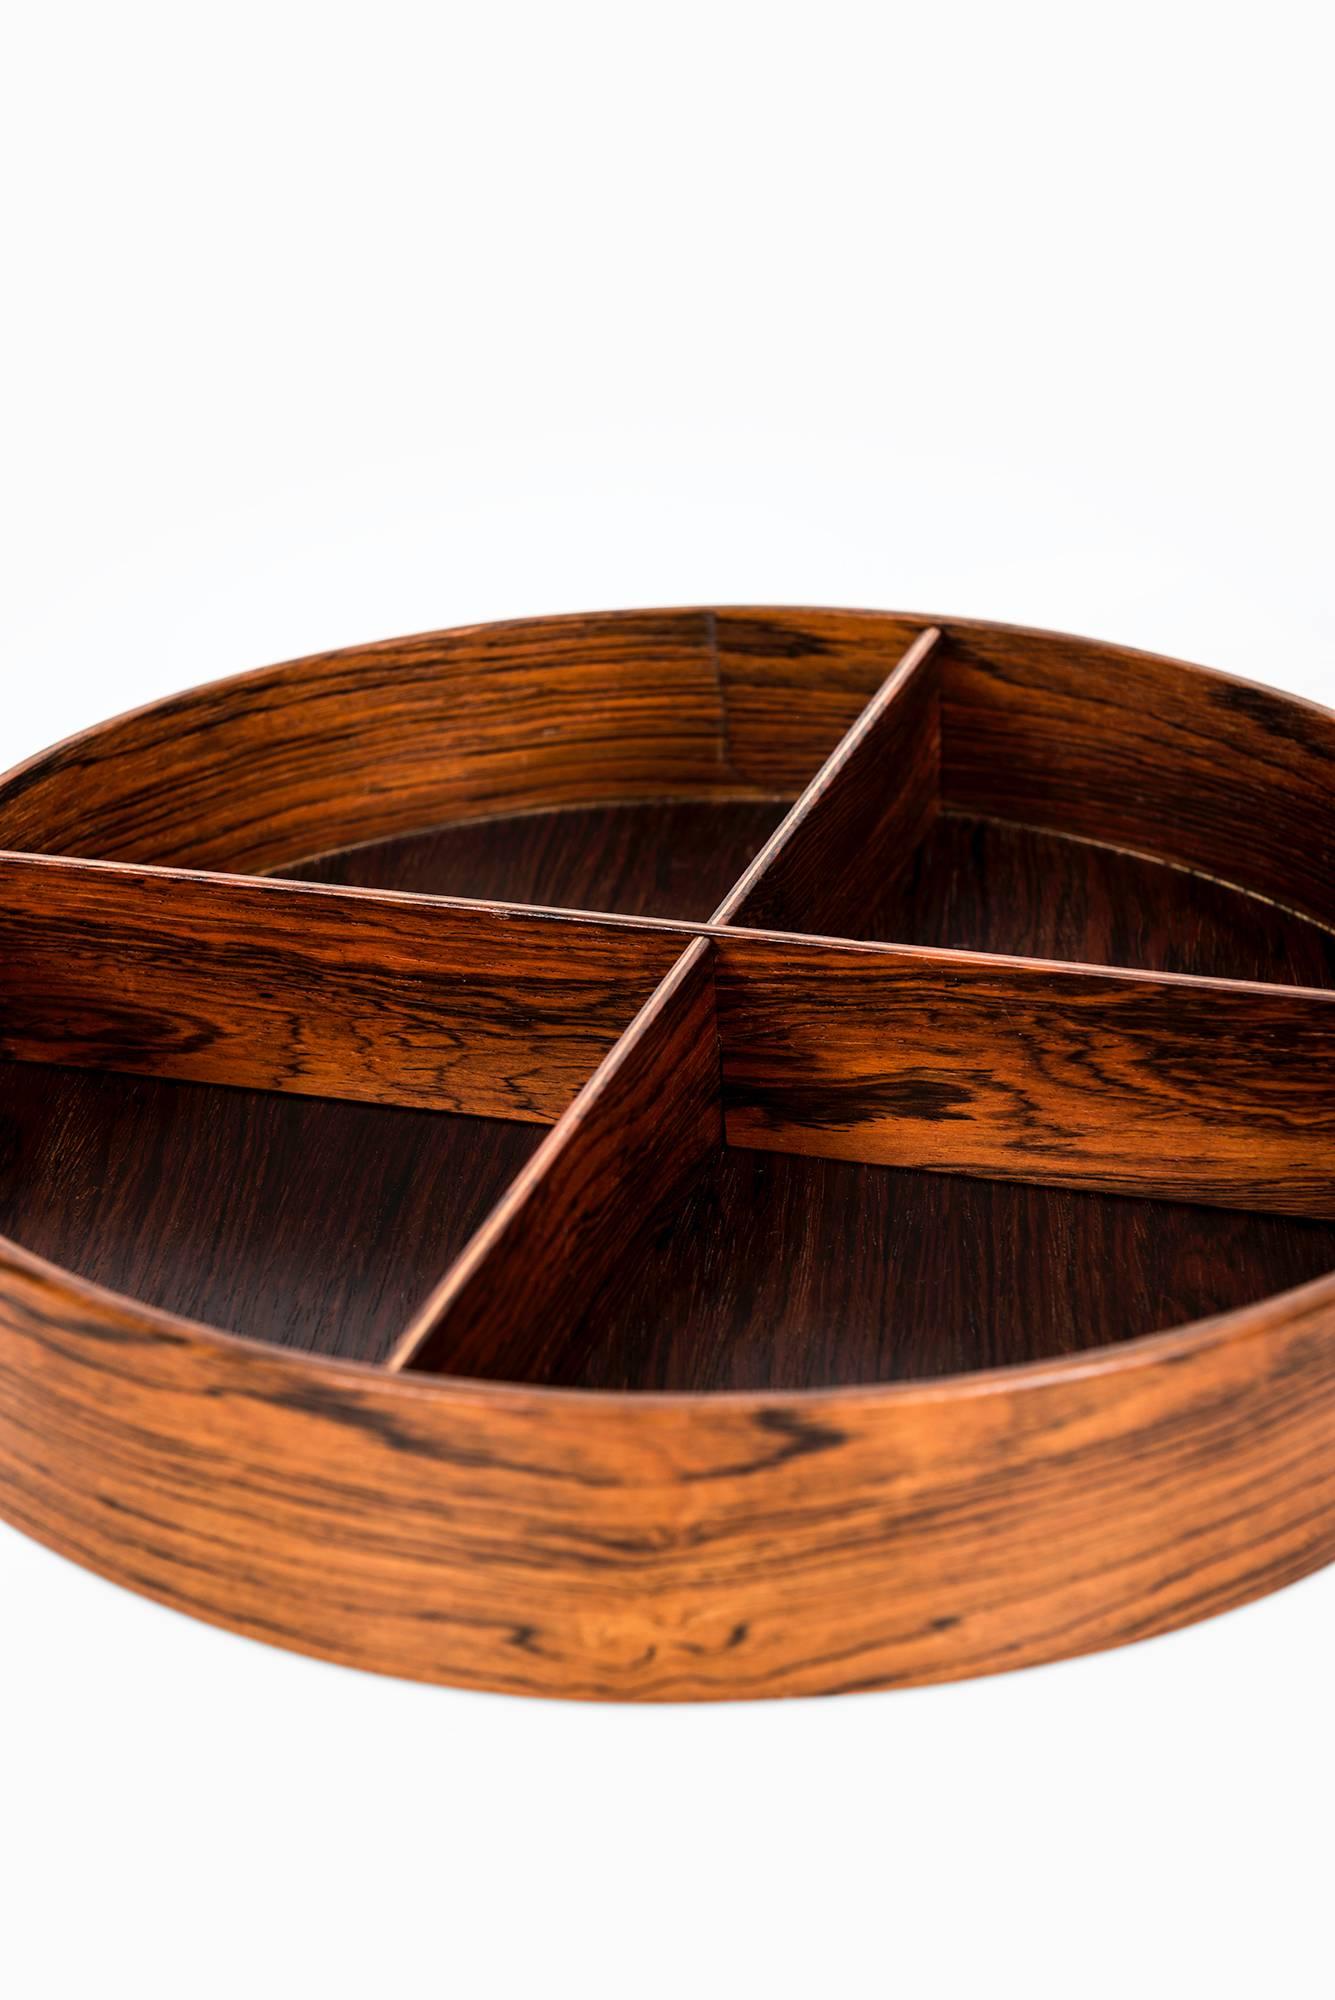 Rosewood tray designed by Torsten Johansson. Produced by AB Formträ in Sweden.